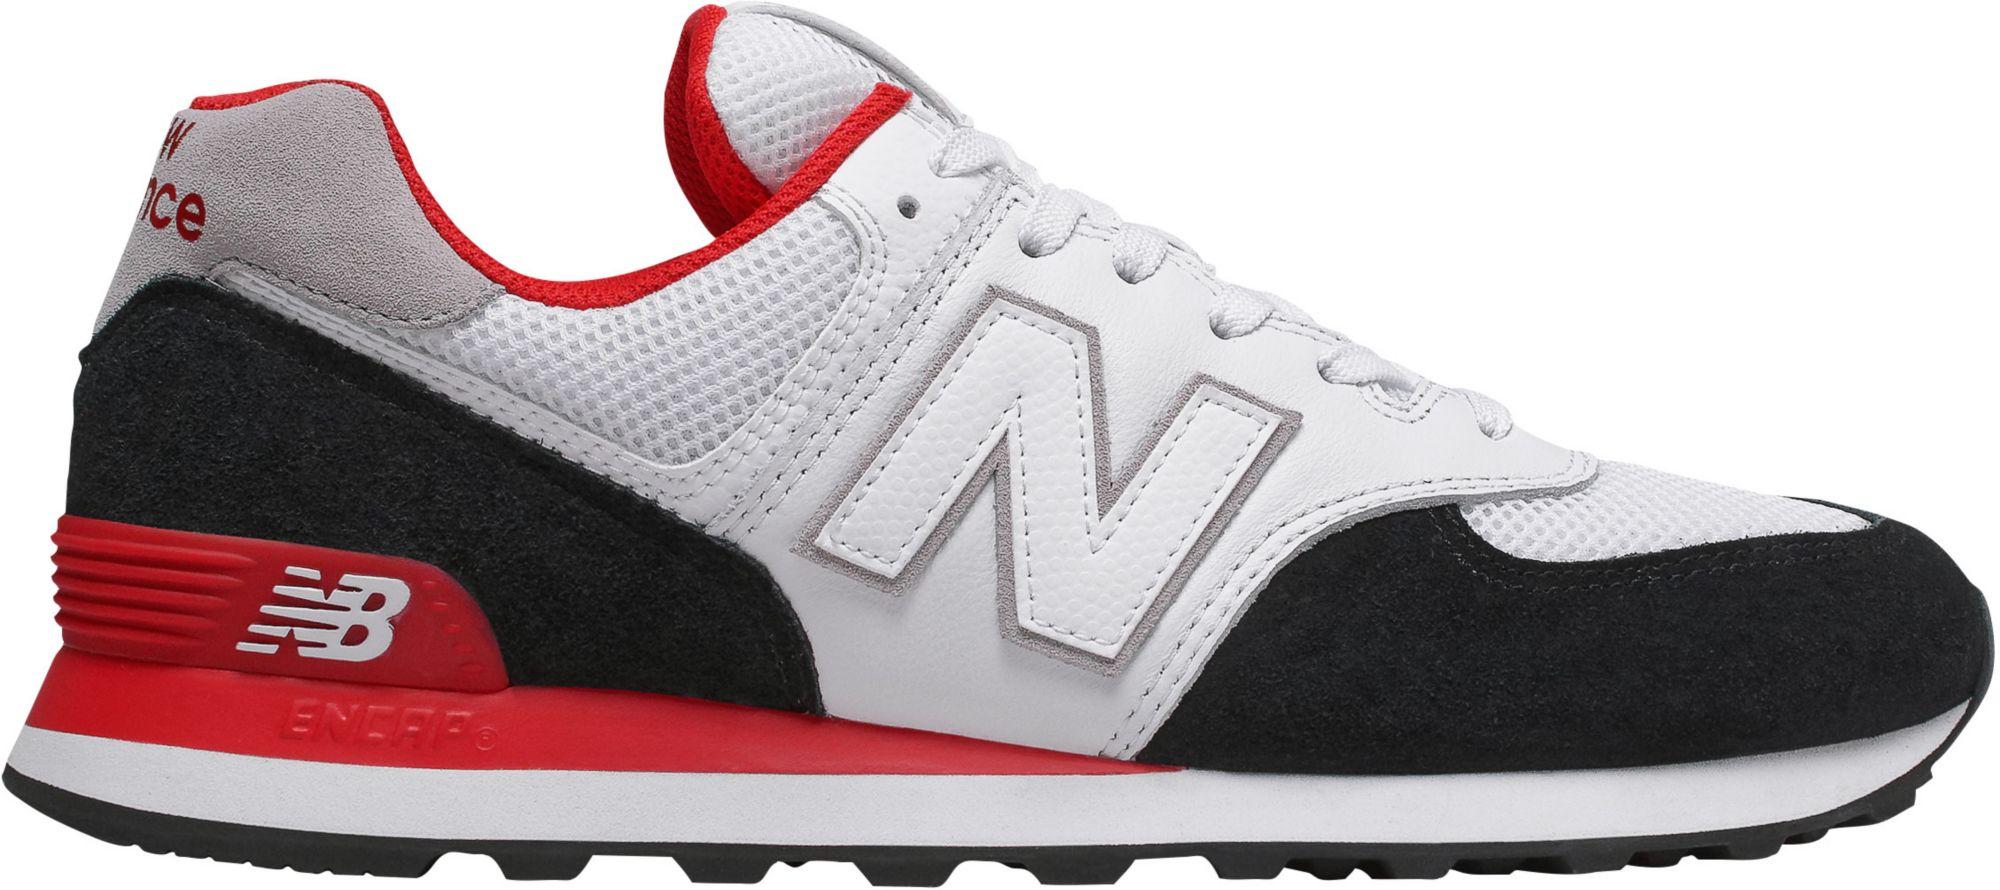 New Balance Suede 574 V2 Shoes in White/Black/Red (White) for Men - Lyst